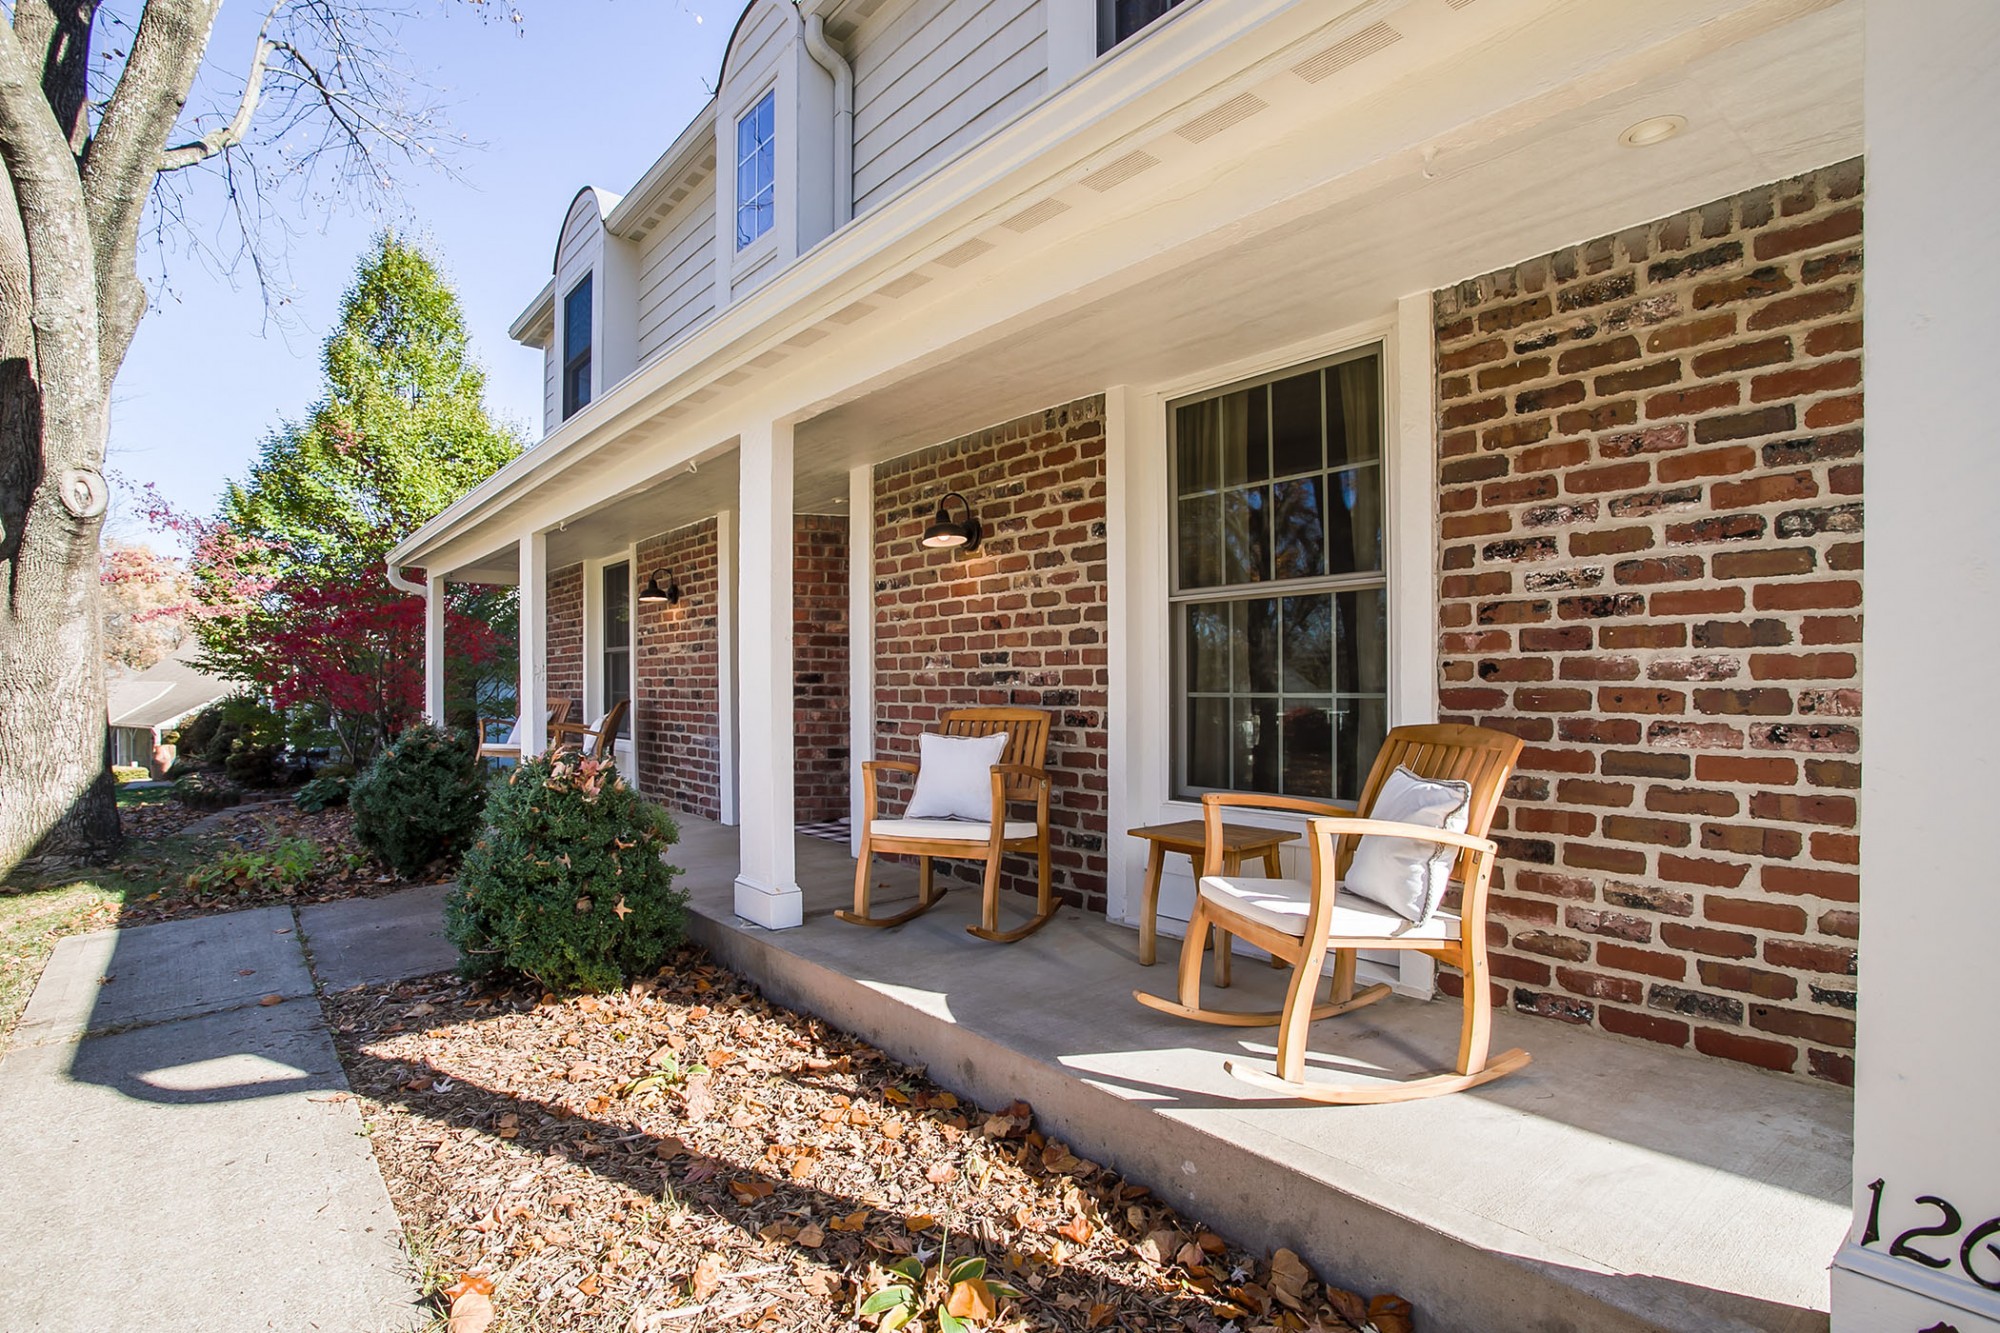 Enjoy a morning coffee, evening cocktail, or chat with a friend on this expansive rocking chair front porch.